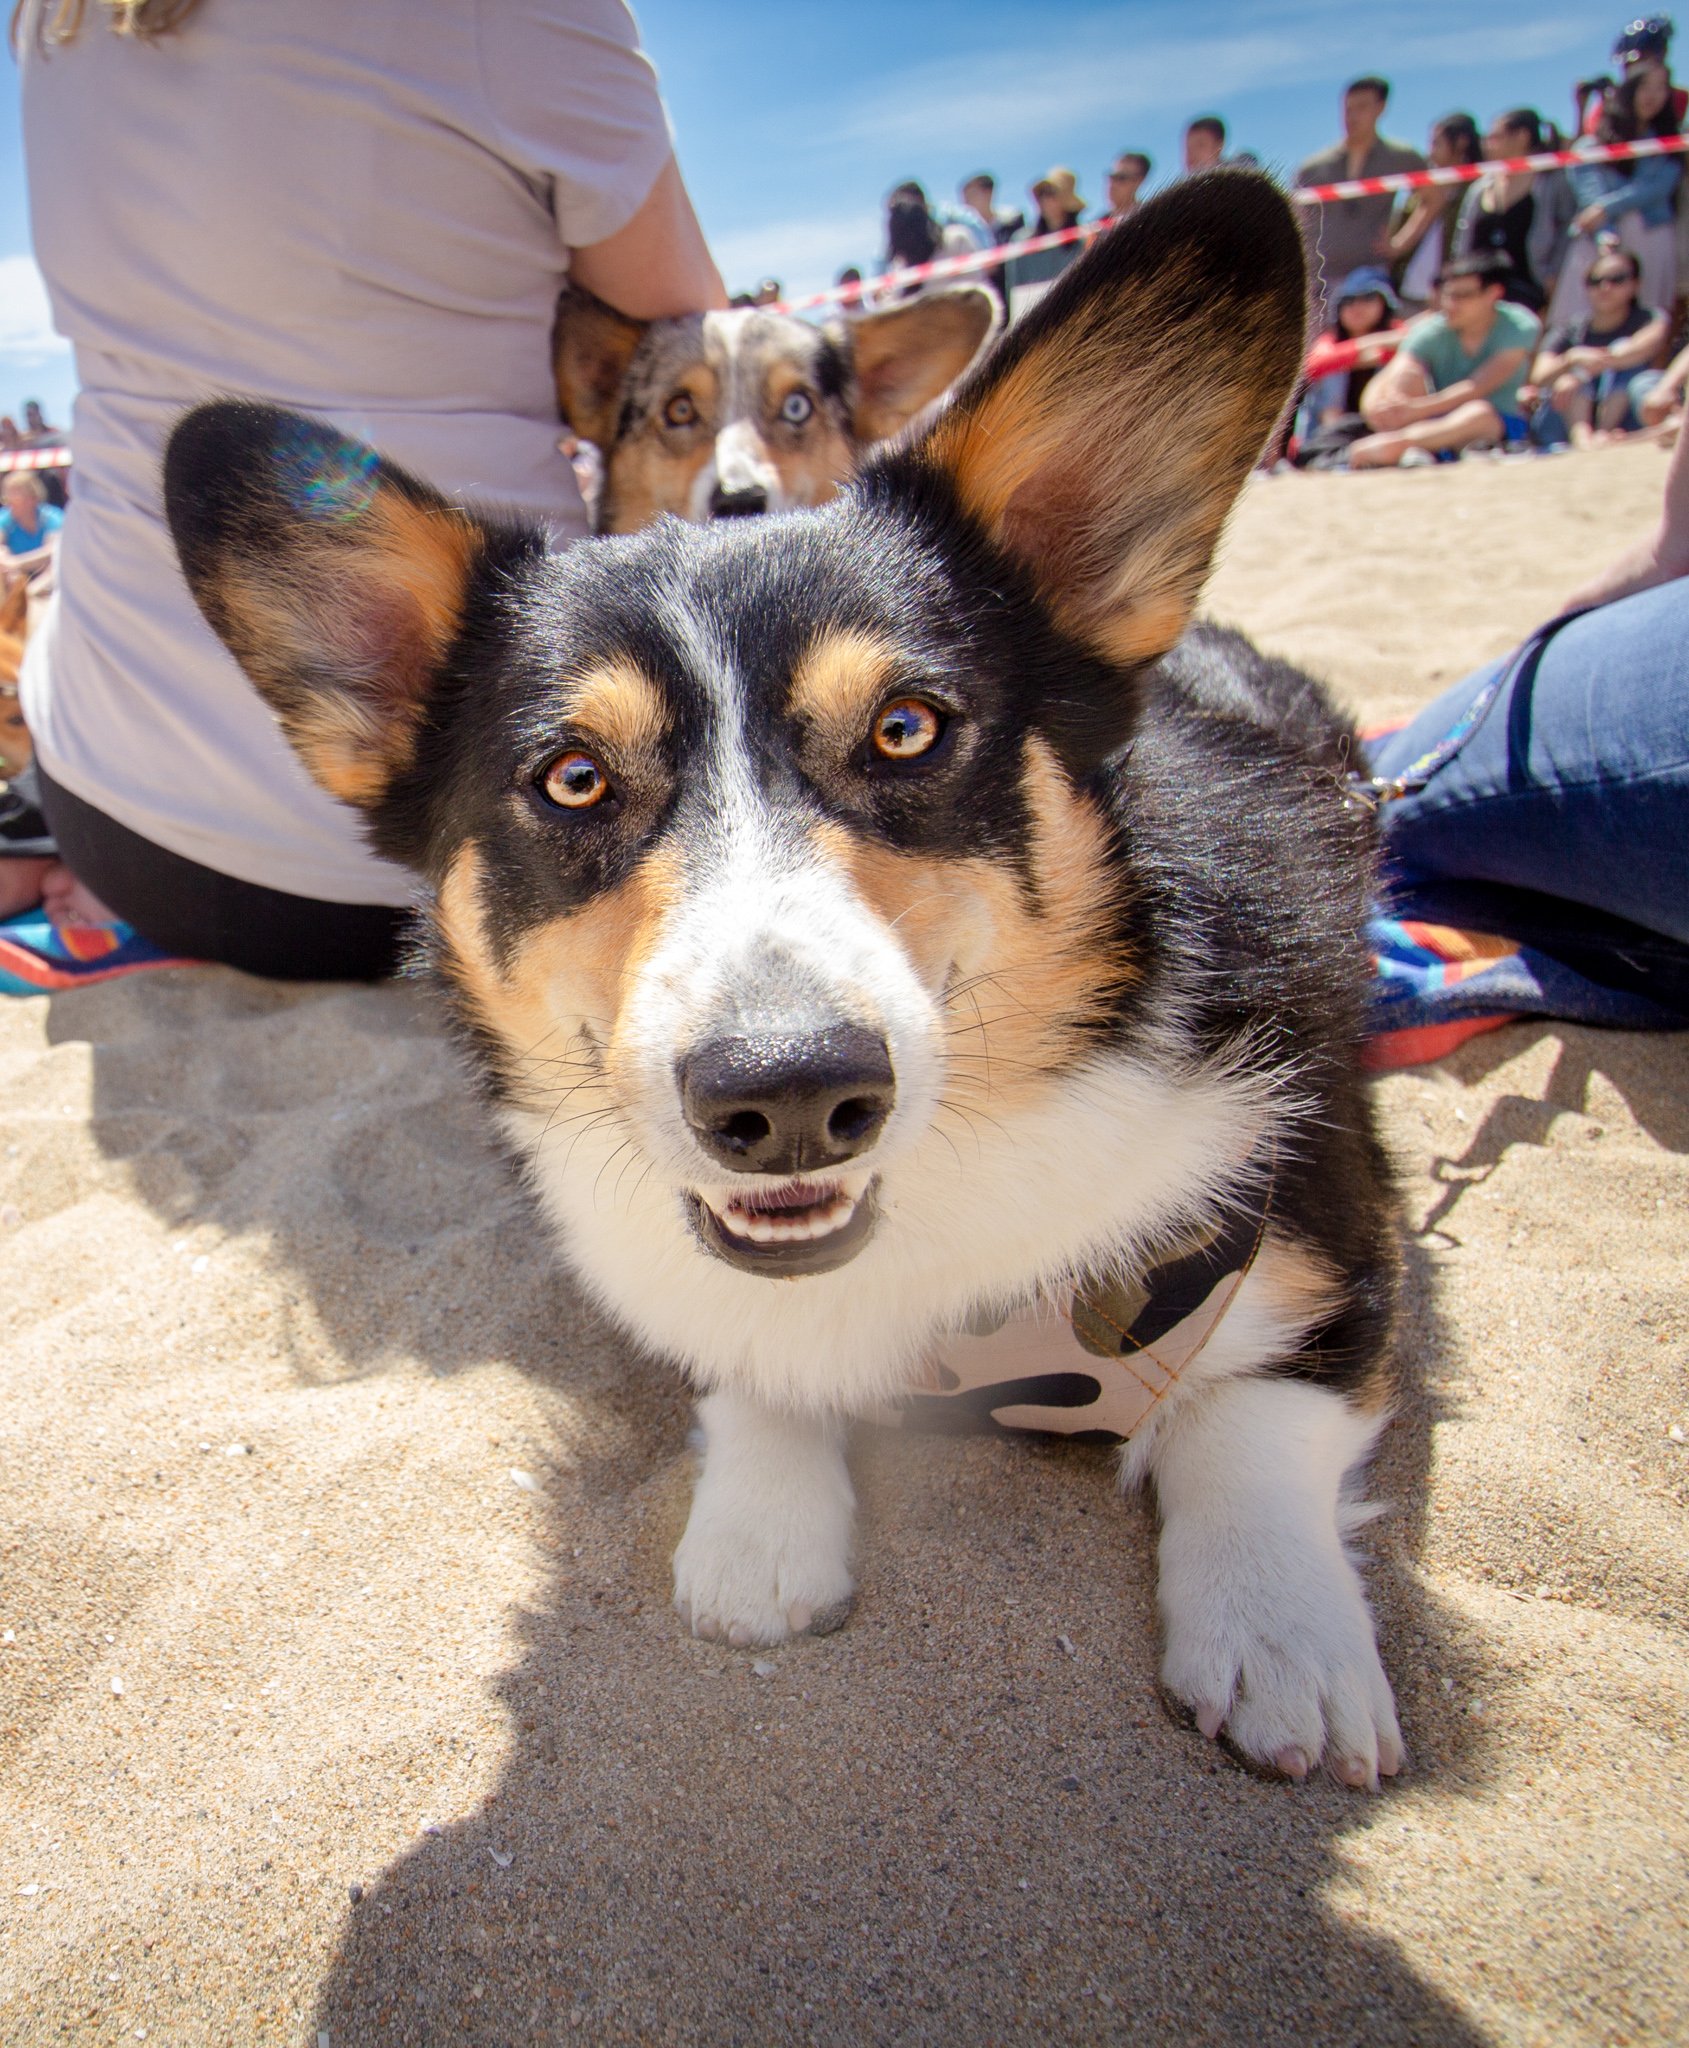 Orange County Pet and Dog Photography - by Steamer Lee - Corgi Beach Day Spring 2019 - Southern Caliornia 09.JPG